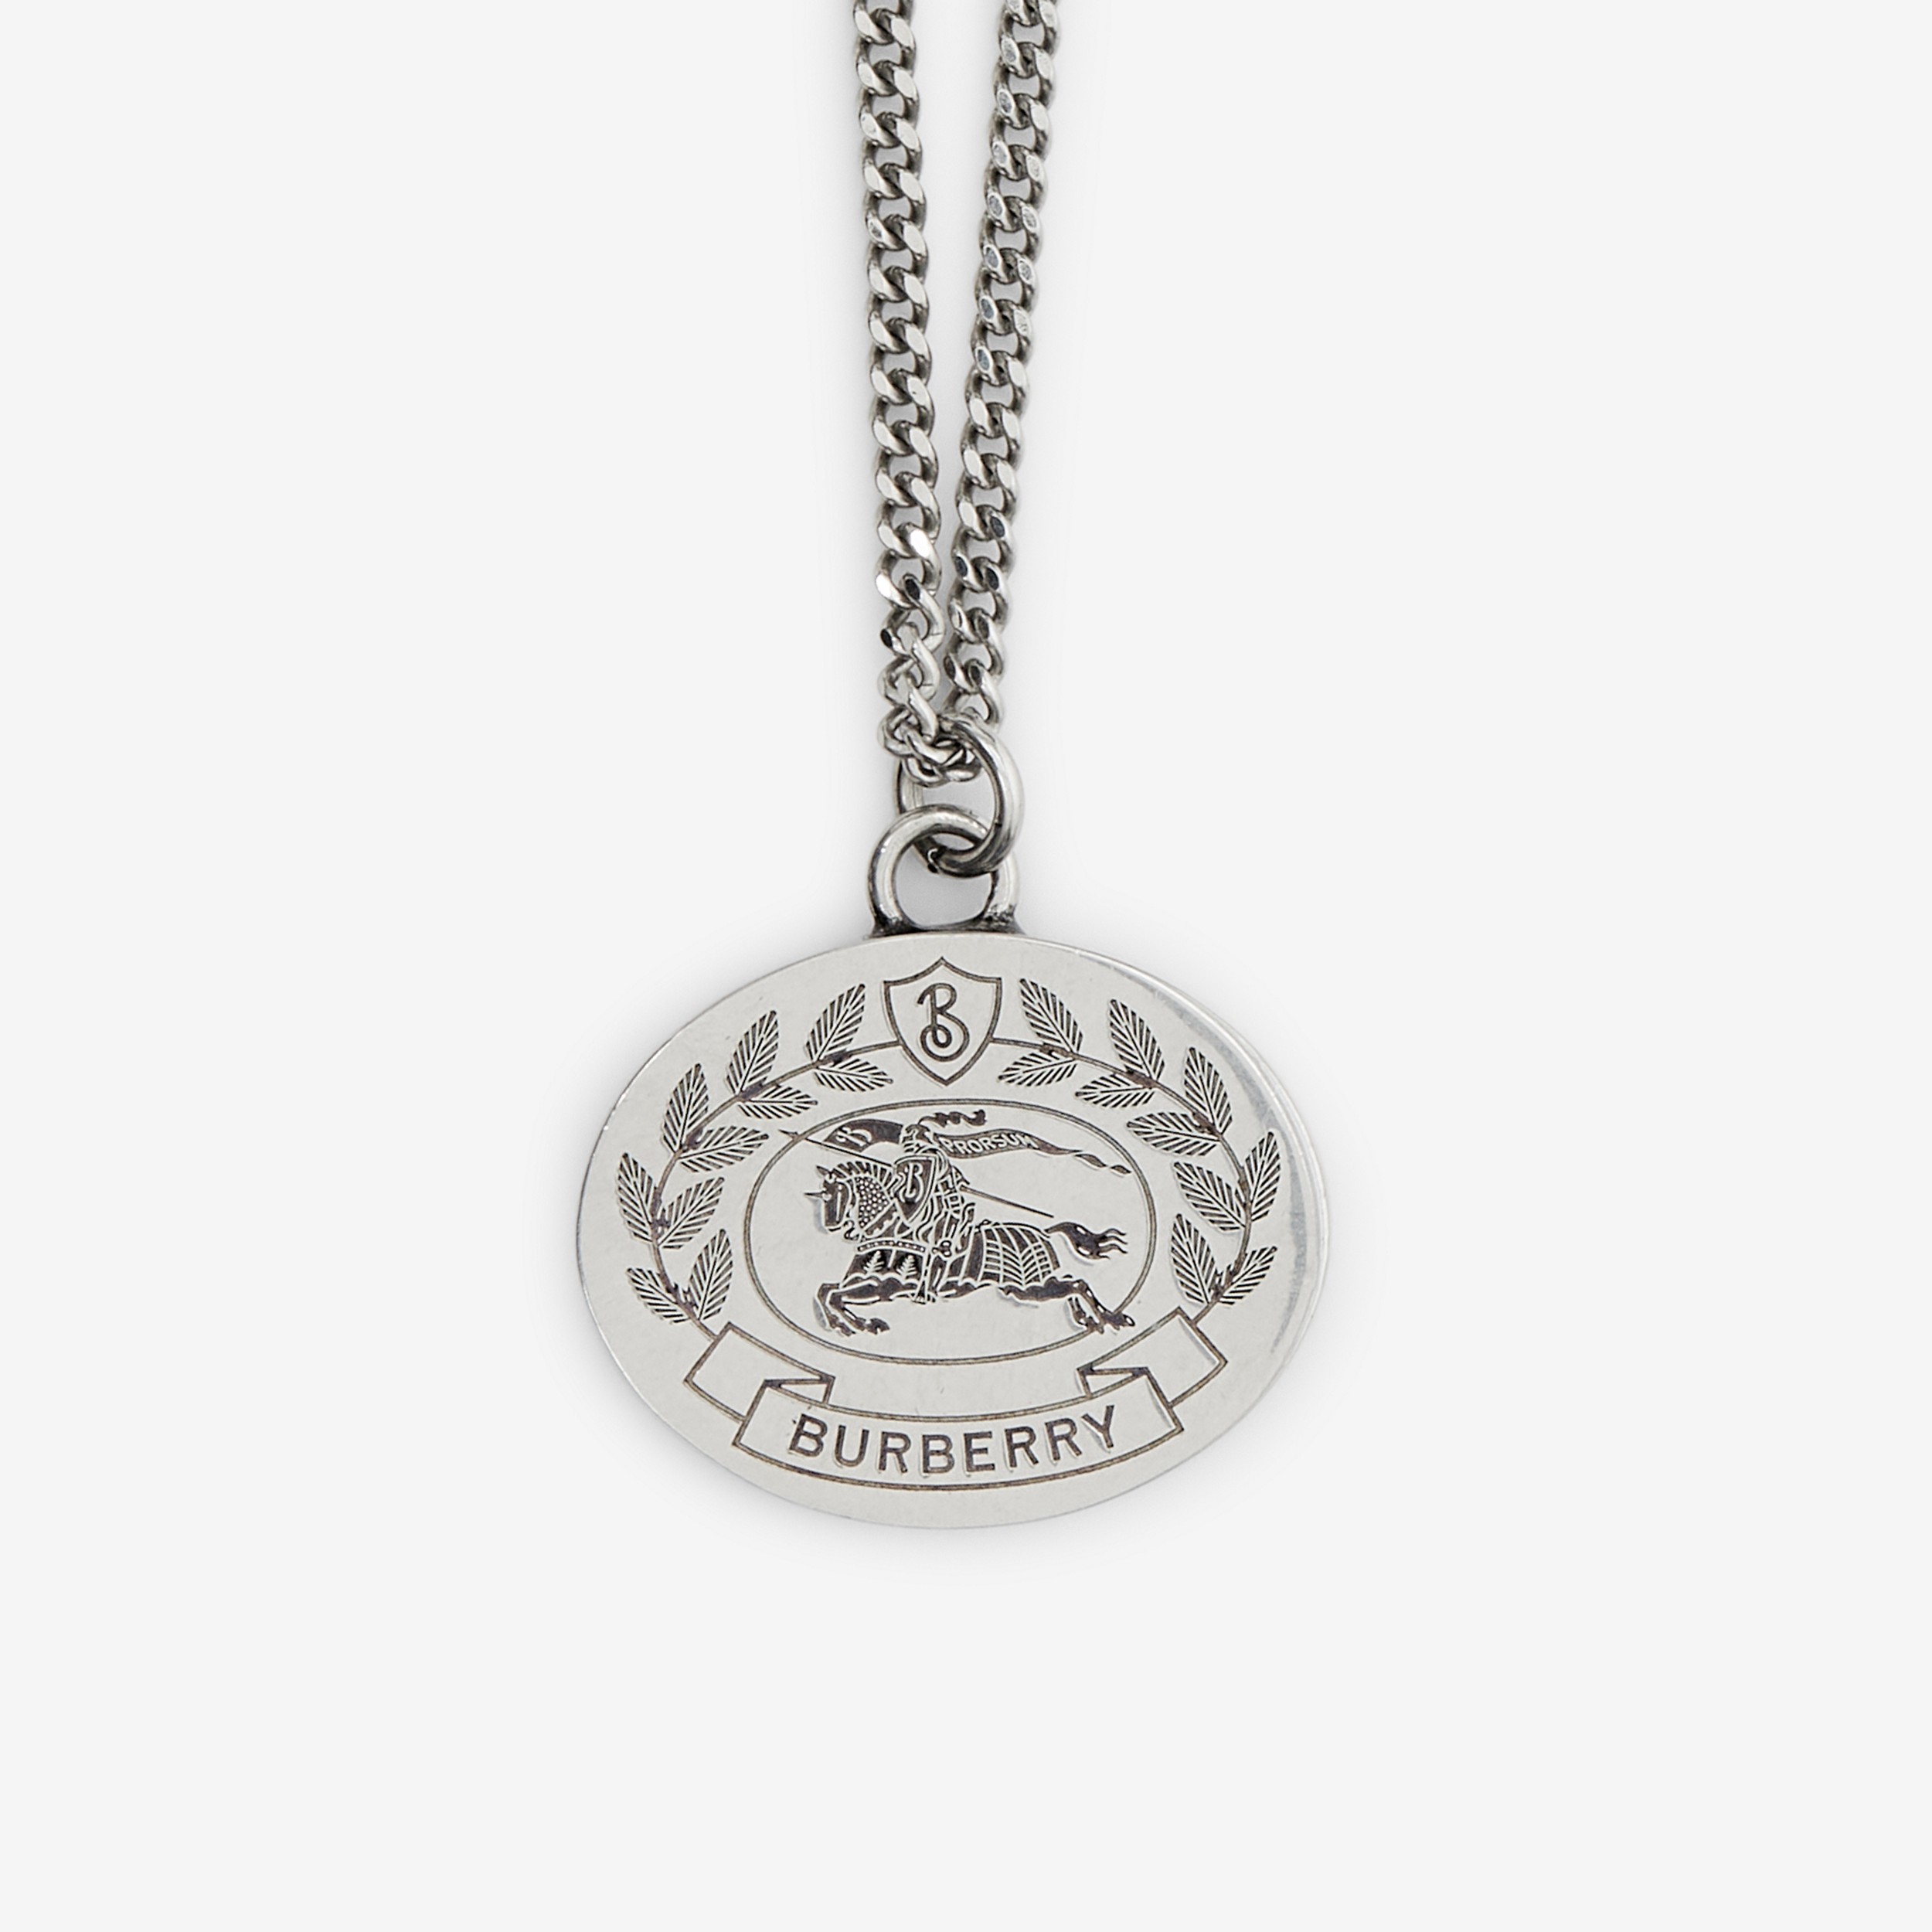 EKD Engraved Palladium-plated Chain-link Necklace in Vintage Steel | Burberry® Official - 2